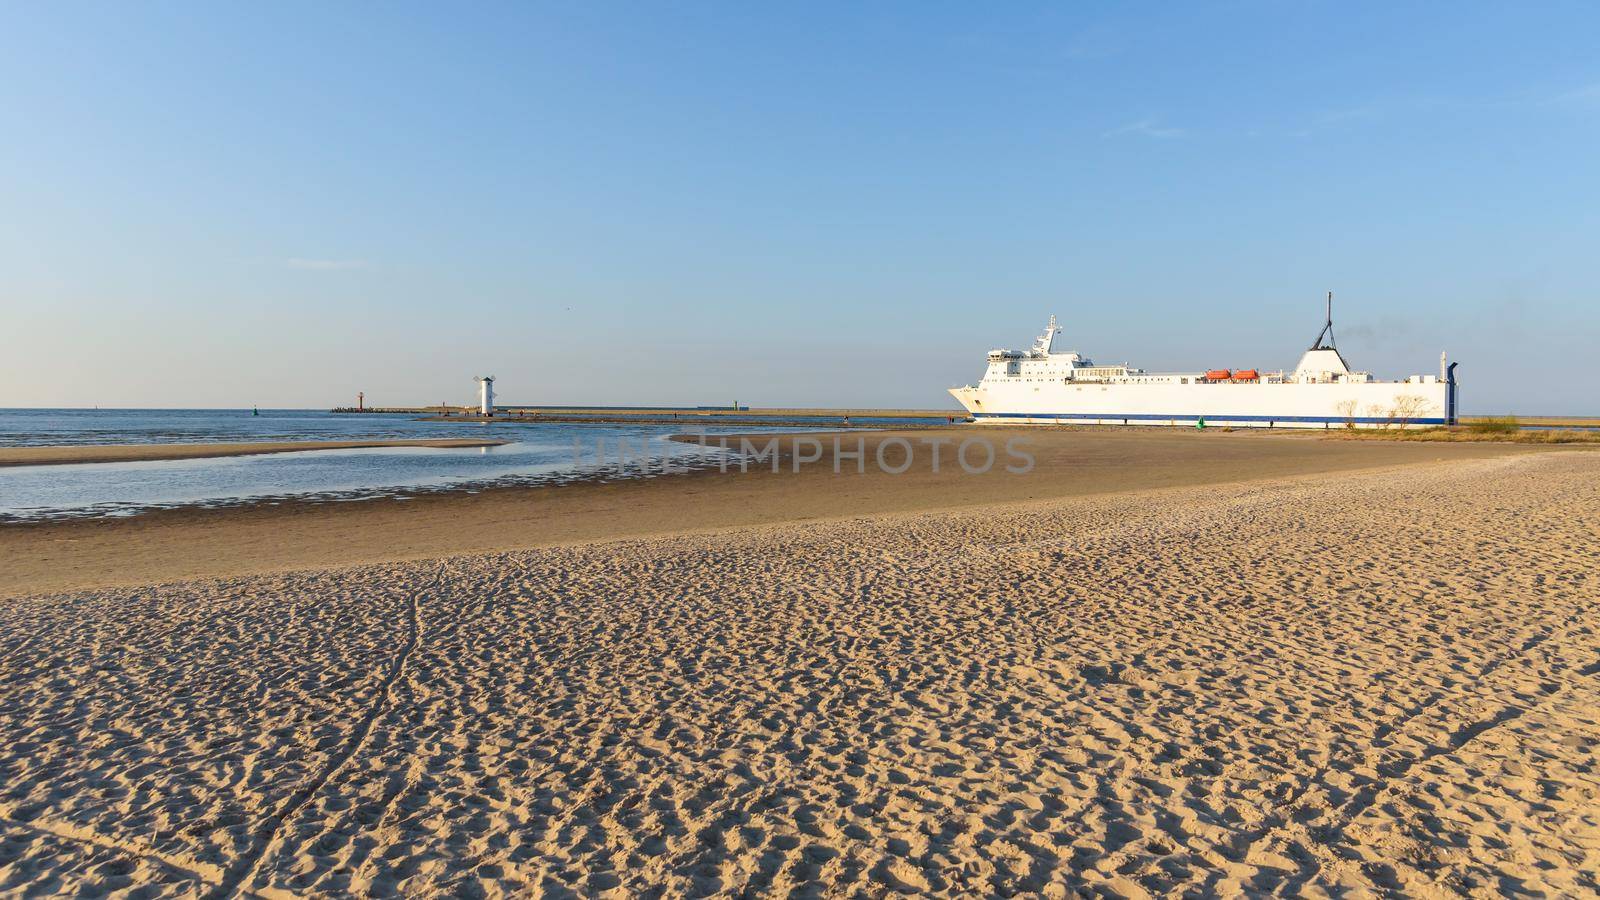 View from the sandy beach of big ferry leaving port of Swinoujscie